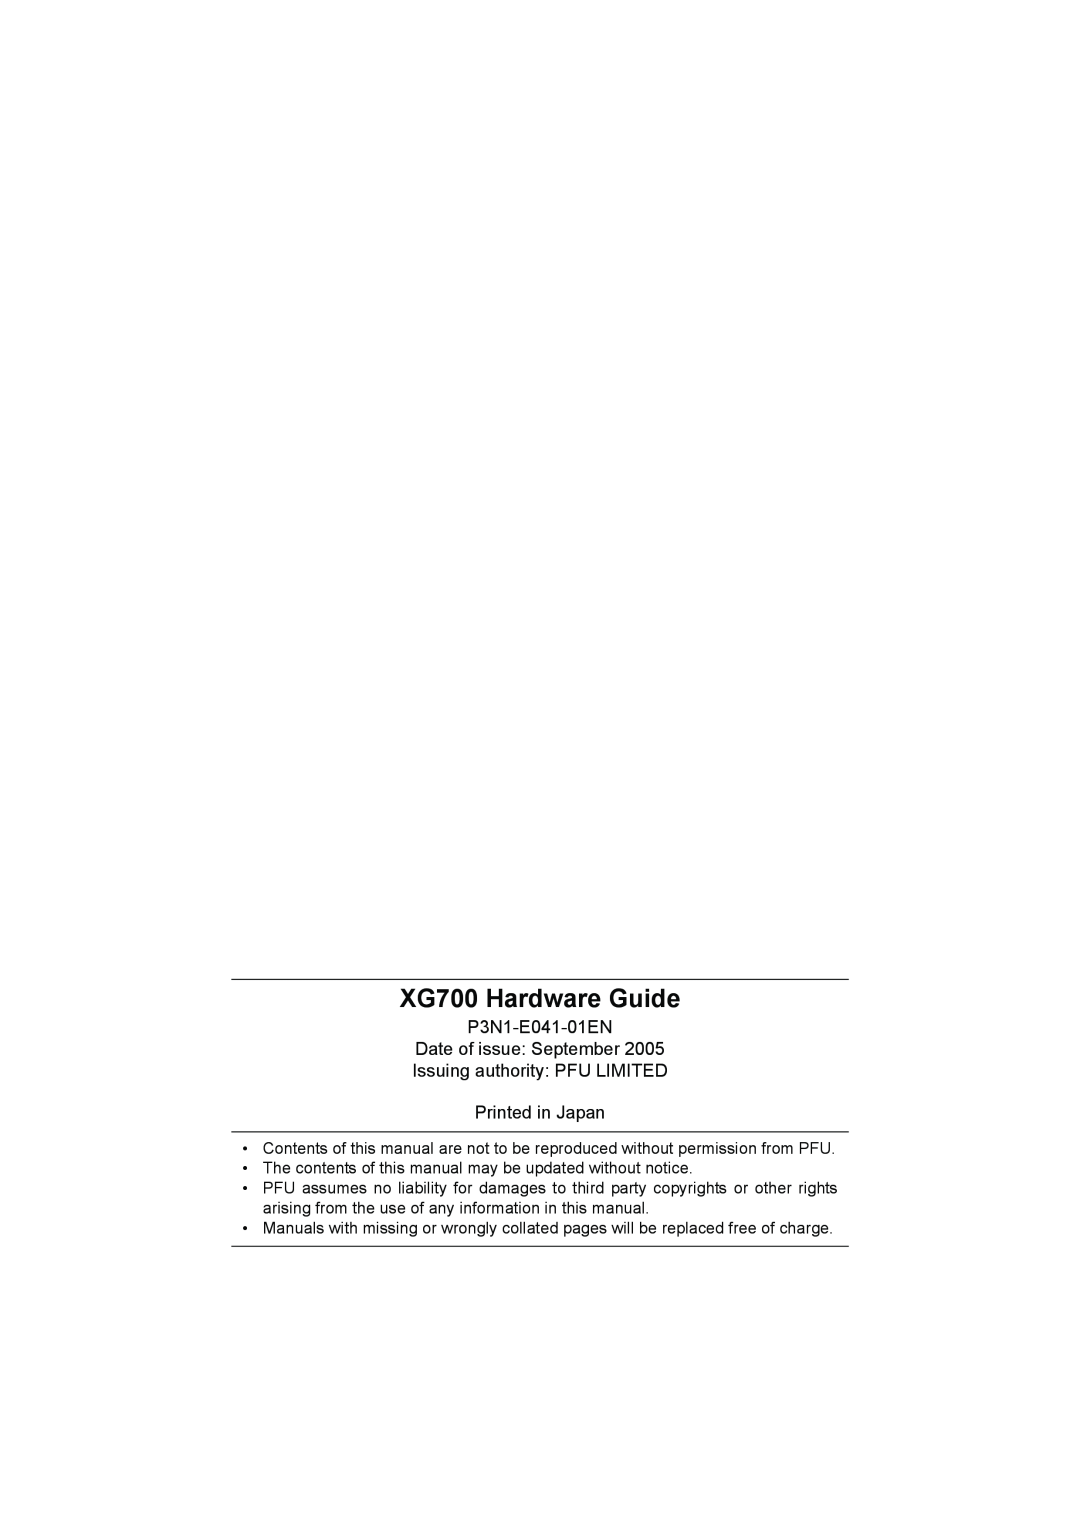 Fujitsu manual P3N1-E041-01EN Date of issue September Issuing authority PFU LIMITED, XG700 Hardware Guide 